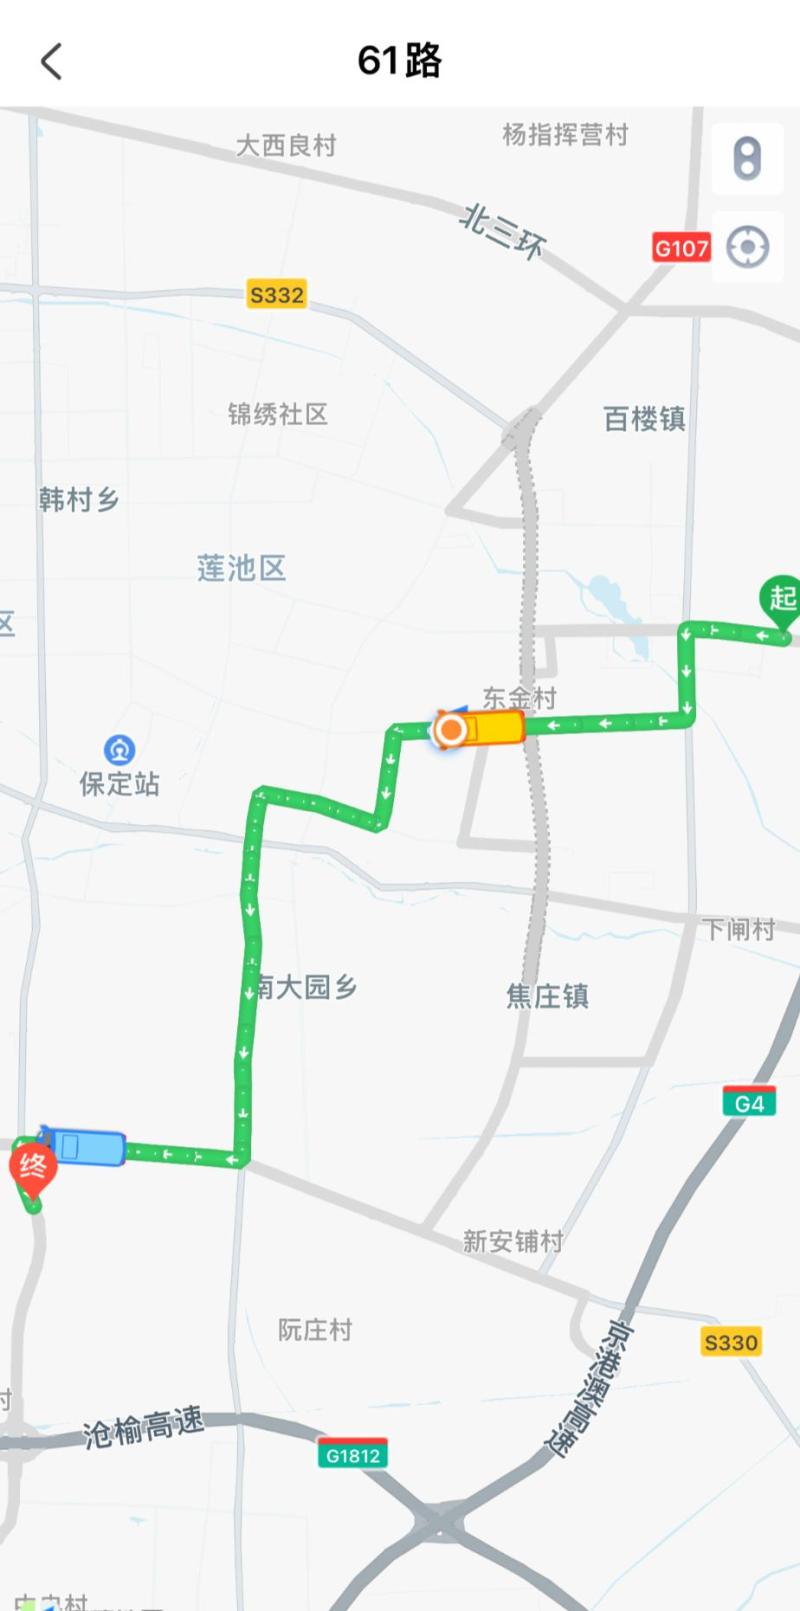 How to support citizen travel? The reporter visited and found it difficult to reduce the number of buses in Baoding from over 1300 to 333. In Baoding City | Bus | Citizen